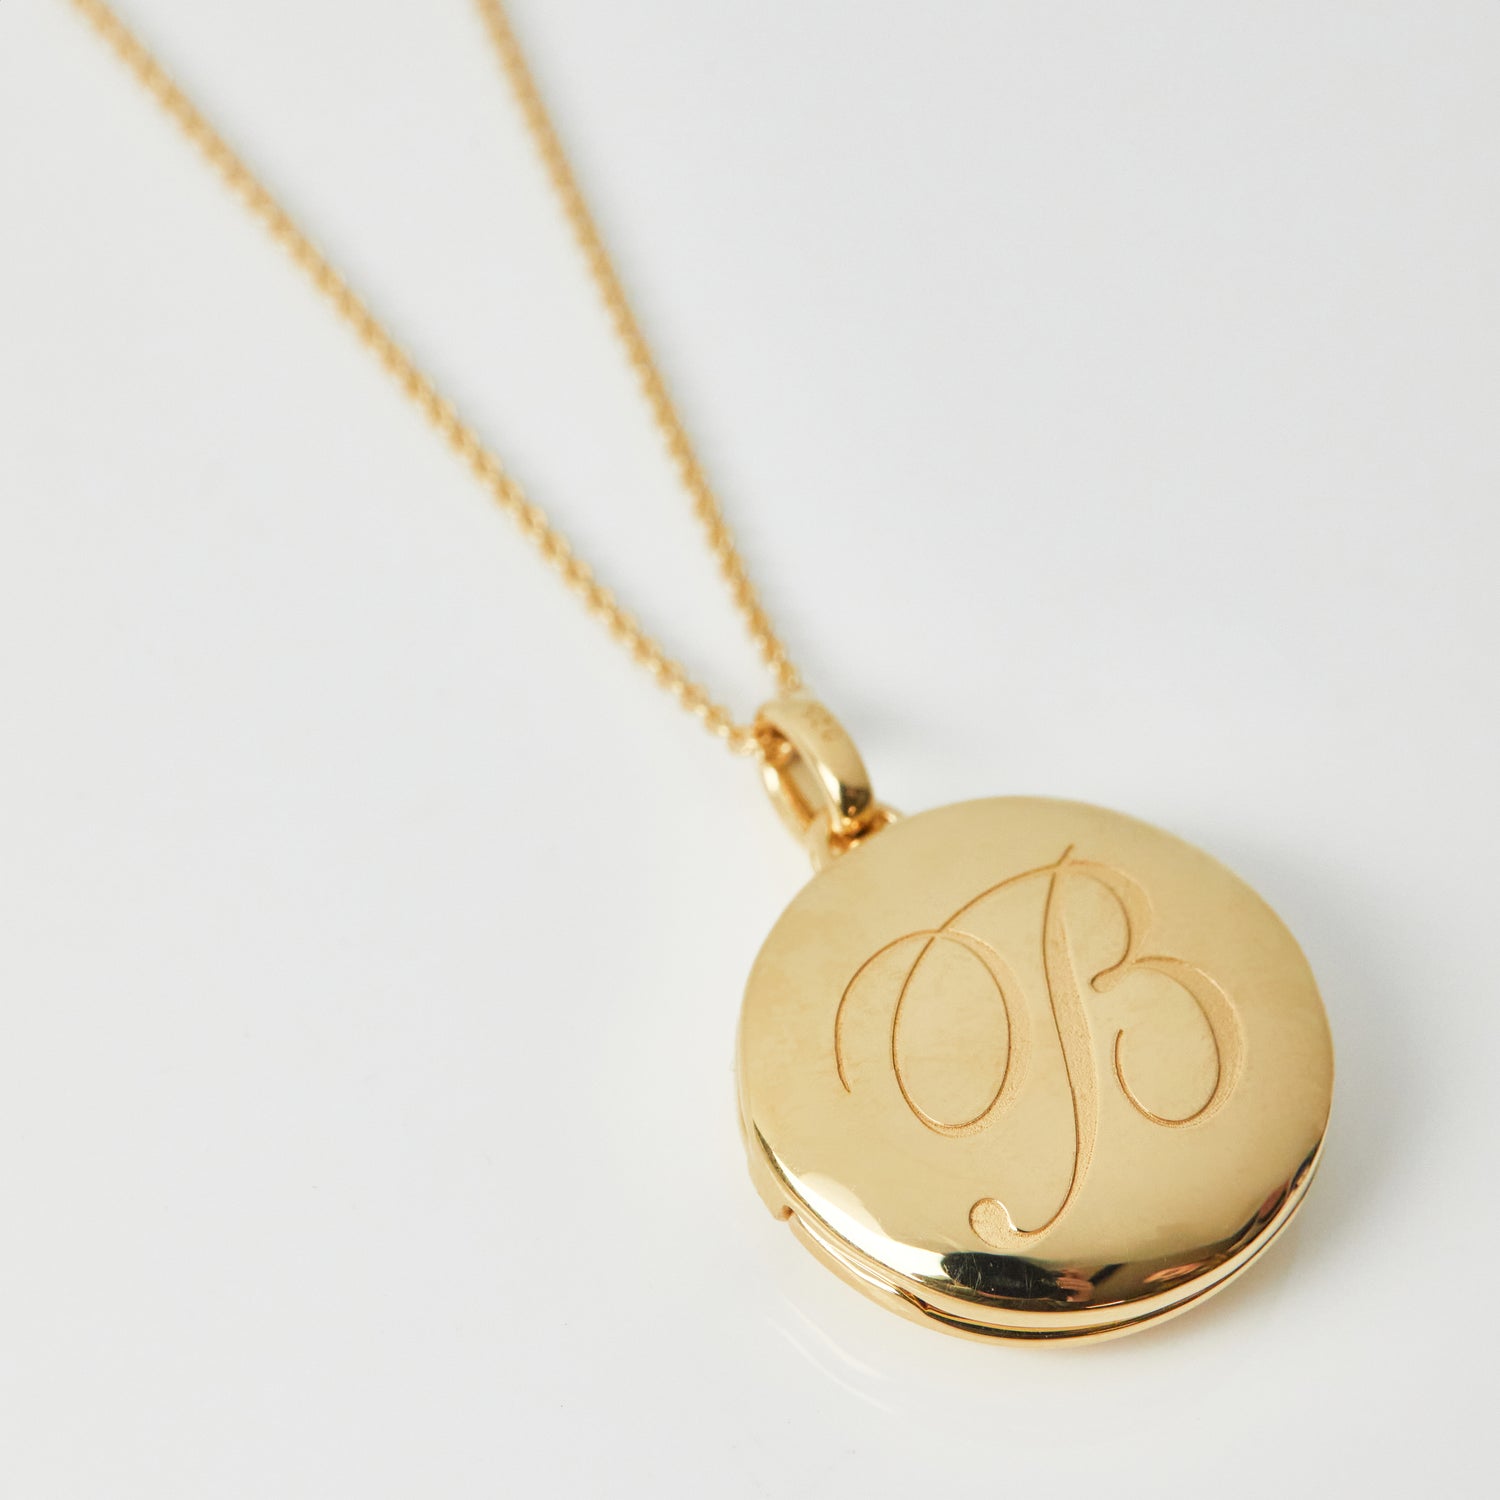 The Mini Ornate Photo Locket Necklace - Gold Vermeil - Letter : Add Picture - Length : 16 in - The M Jewelers